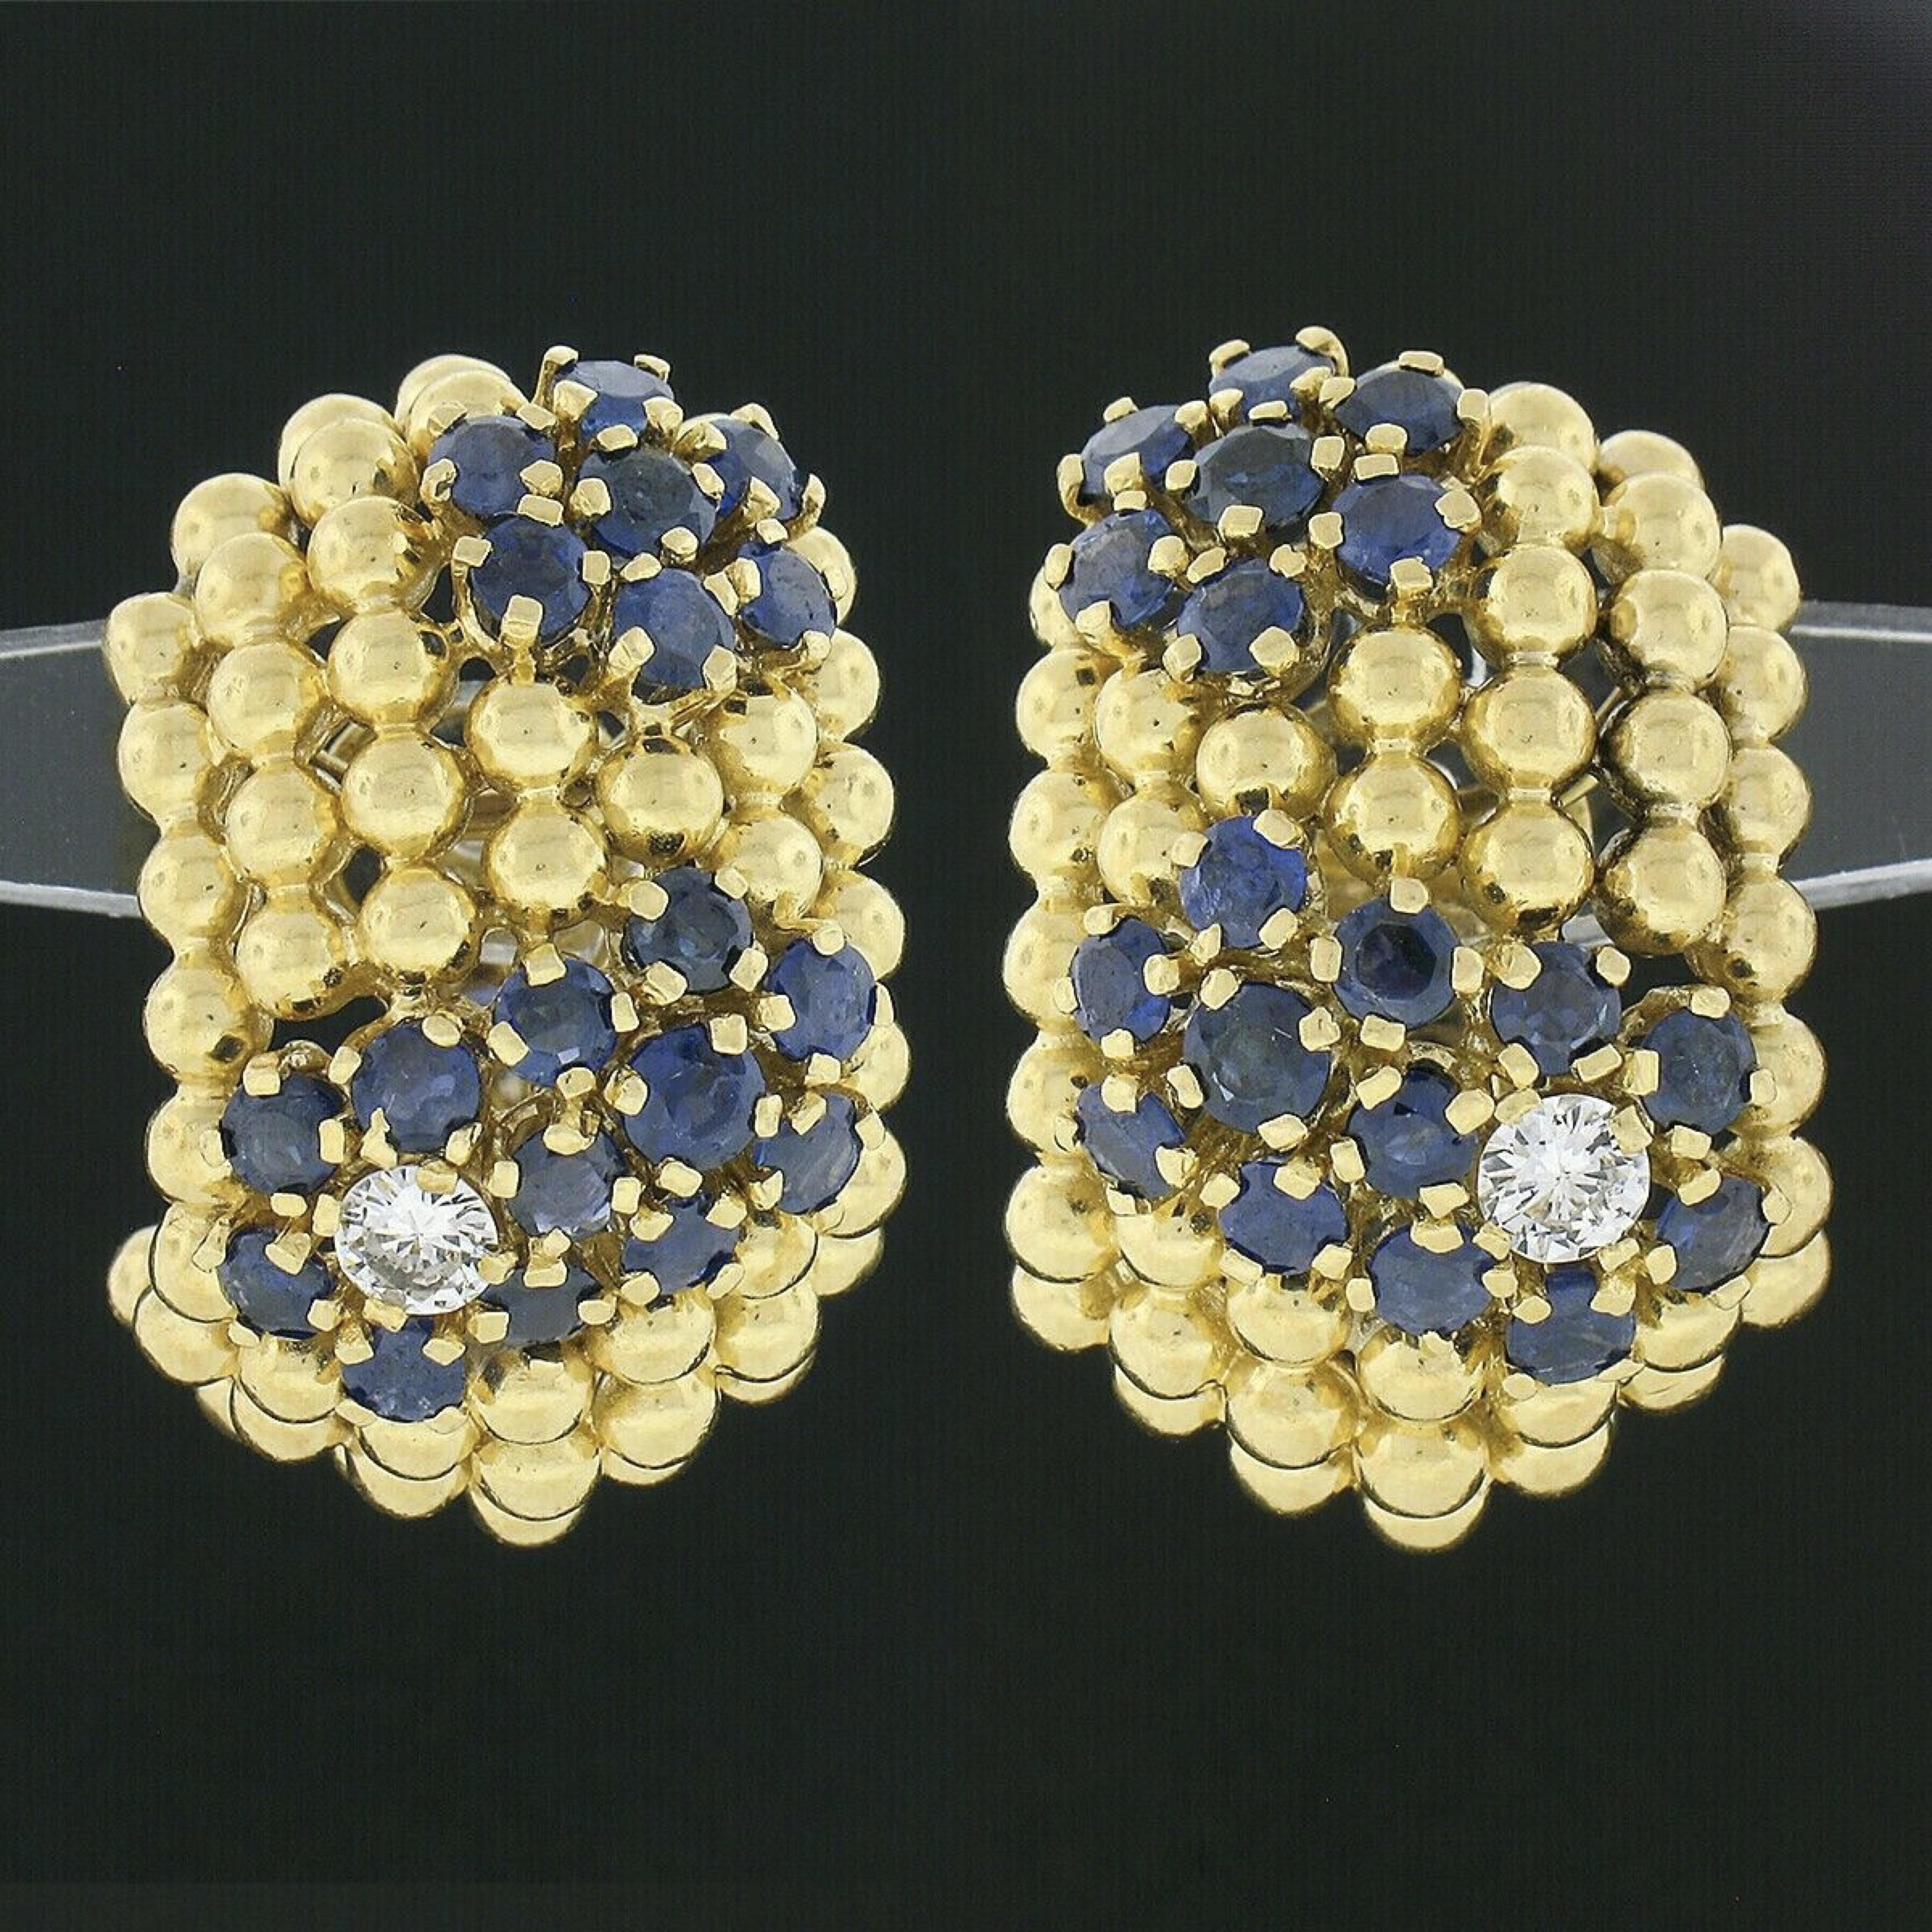 This outstanding pair of vintage earrings is crafted in solid 18k yellow gold and features a wide cuff design with each adorned with 3 sapphire and diamond flower accents throughout. The wide design is constructed from 7 rows of gold beads in which